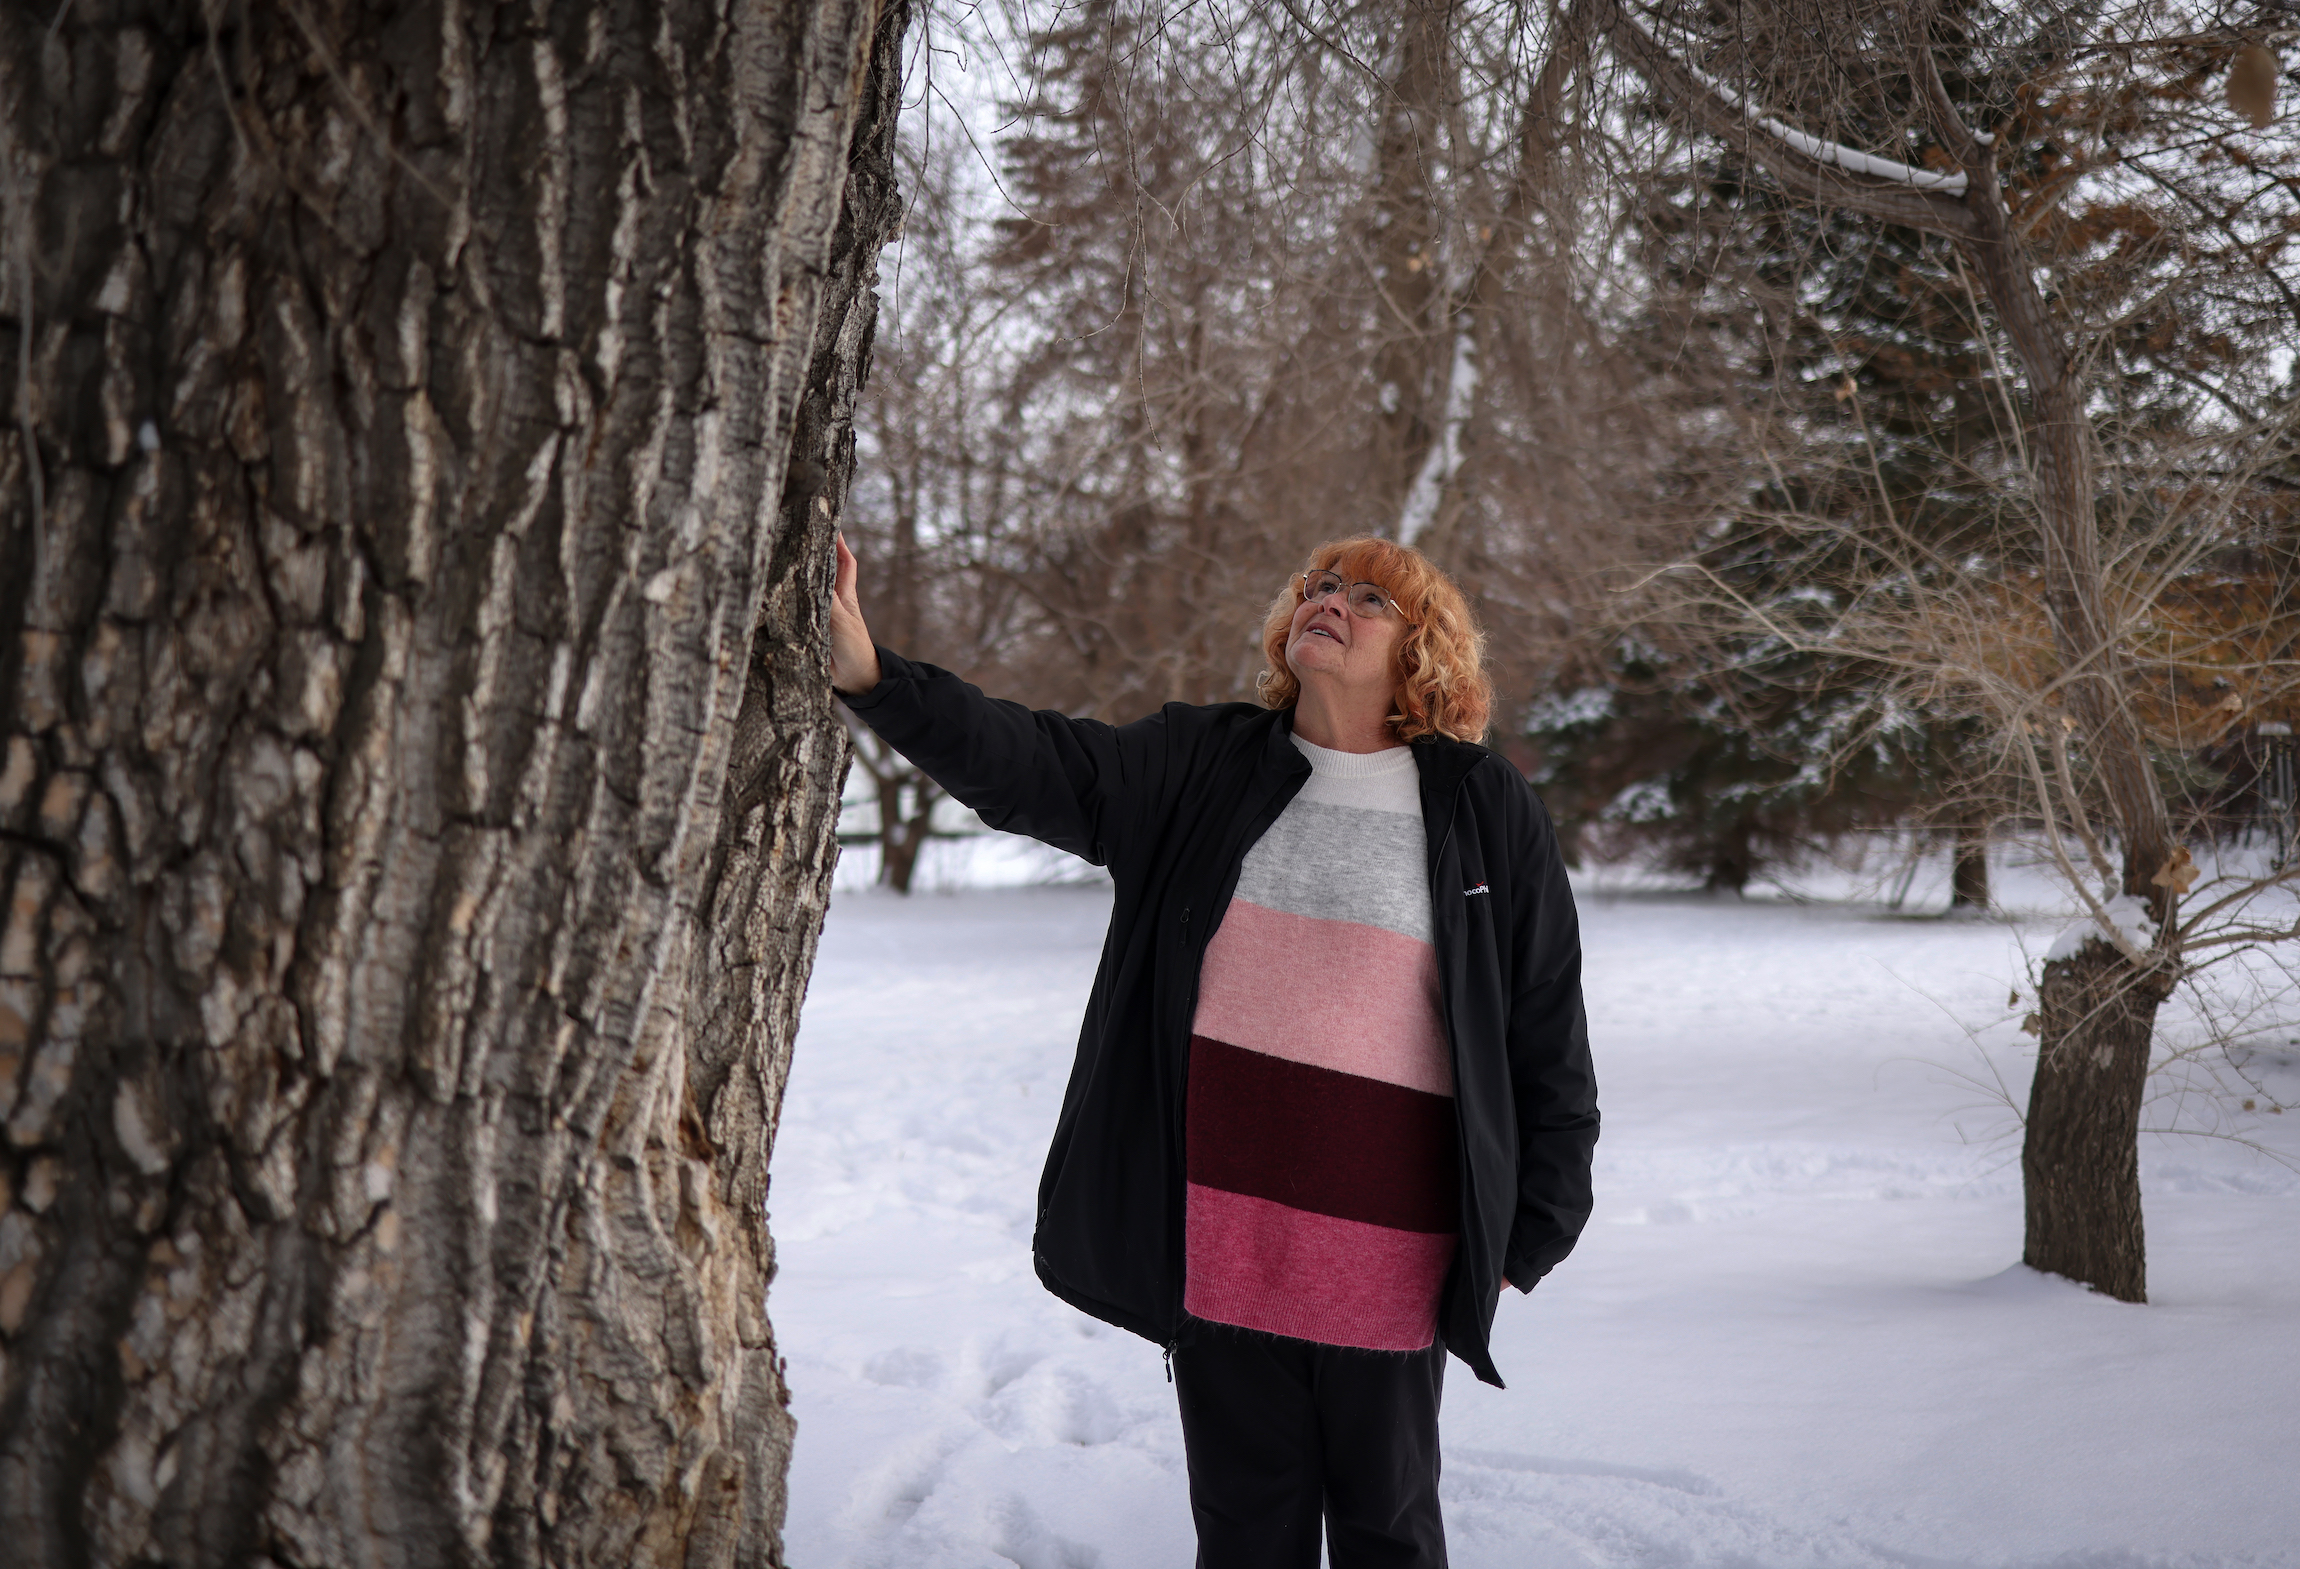 A woman looks up at a cottonwood tree amid snow